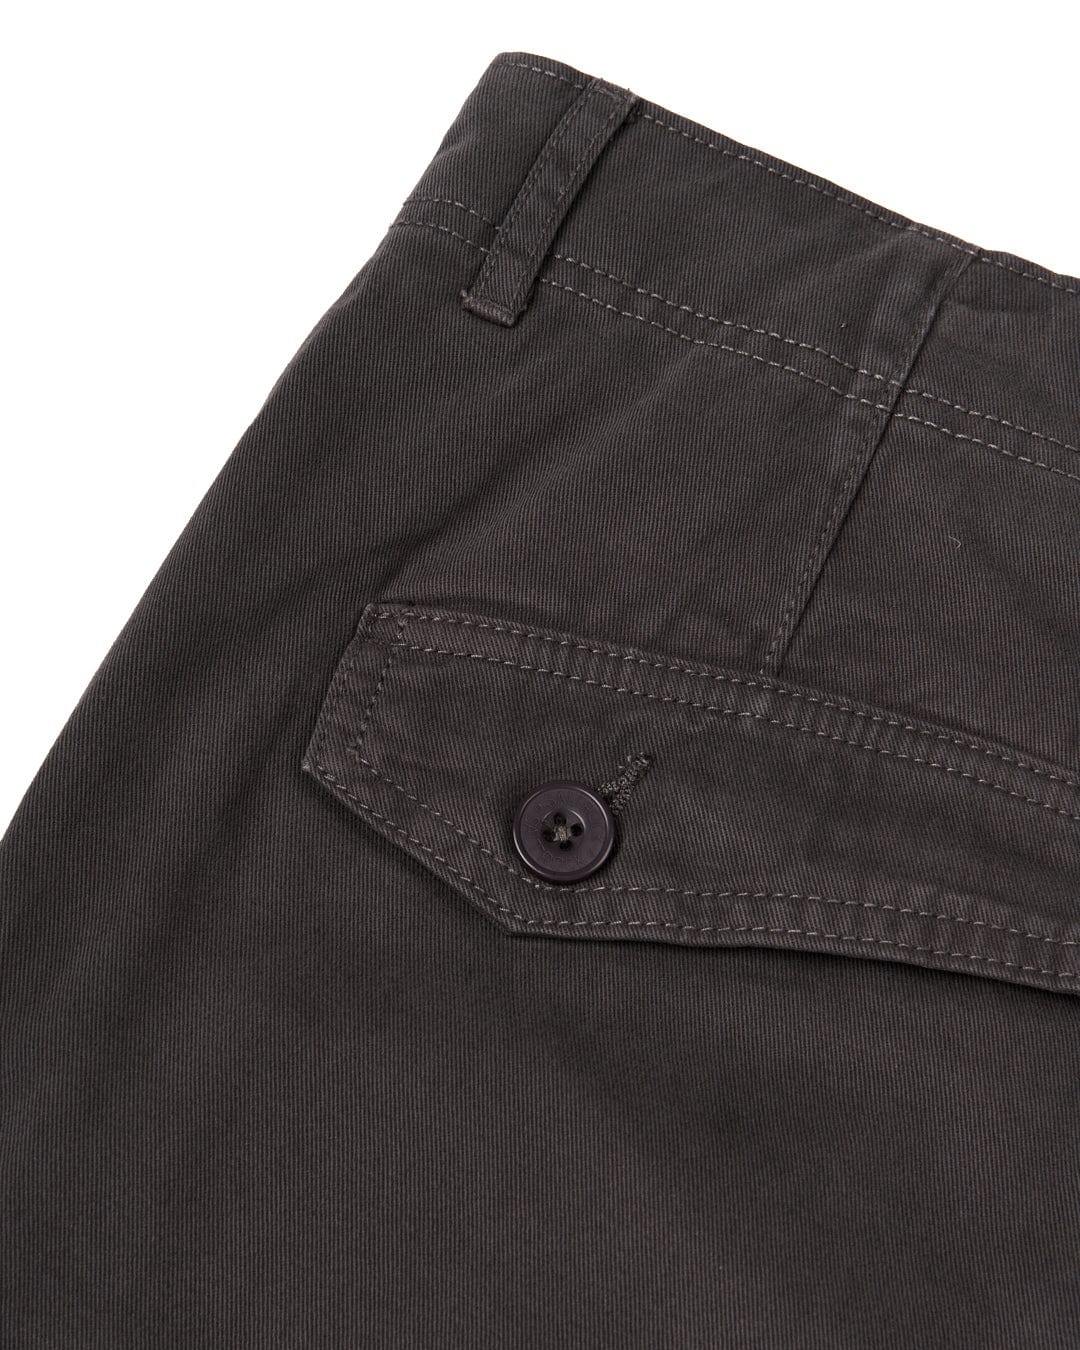 Close-up of a Penwith II - Mens Cargo Shorts - Dark Grey pocket with a button by Saltrock.